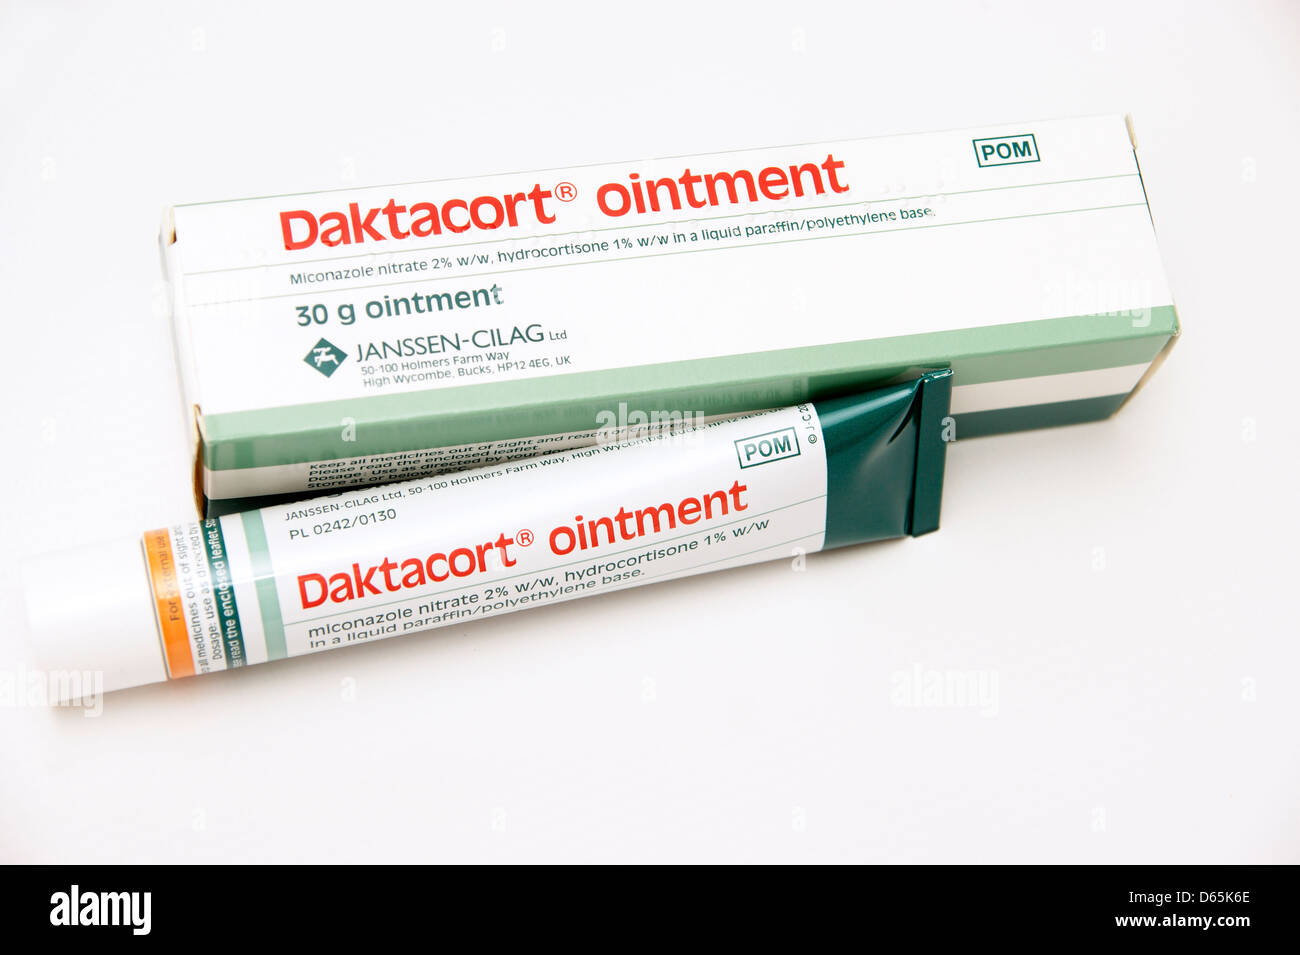 Daktacort ointment (miconazole nitrate) hydrocortisone steroid cream to  treat inflamed conditions eczema dermatitis Stock Photo - Alamy